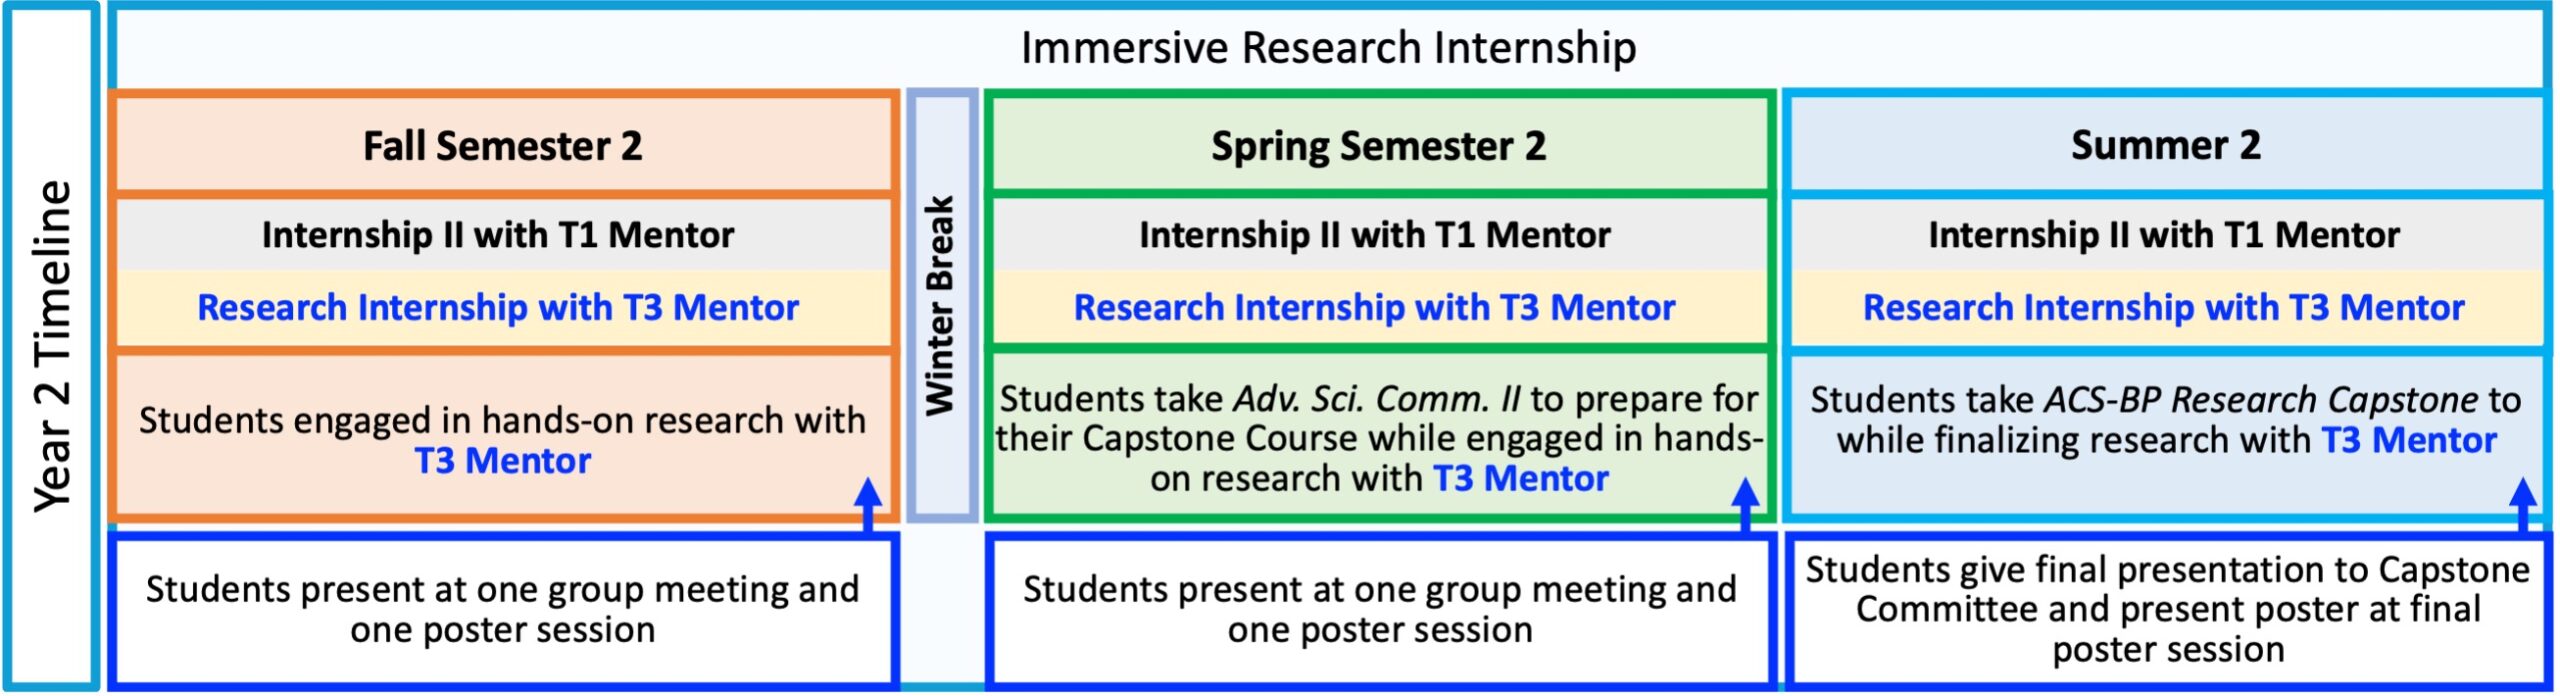 Cartoon of the timeline of events in the second year of the ACS Bridge Program. Throughout the Fall, Spring and Summer of Year 2, students continue working on the Immersive Research Internship portion of the program which includes the following activities (also described above) 1. Meet with their T1 Mentor for ≈1 hour per week 2. Meet with their T3 Mentor for ≈1 hour per week 3. Engage in hands-on research in their T3 Mentor’s lab for 36-40 hours per week 4. Attend group meetings for the T3 Mentor’s lab ≈1-2 hours per week. a. Prepare one oral presentation on their research project to give during group meeting at least once per summer/semester 5. Prepare one poster on their research project to present at a poster session at MSU Denver or a partner institution once per summer/semester. The only deviations from the regularly recurring activities of the Immersive Research Internship occur at the following times for the following reasons: 1. During the Spring Semester of Year 2, the students take Advanced Science Communication II, wherein they perform guided activities that will form the groundwork for their written theses. a. The time commitment for hands-on research drops to ≈30 hours per week while students complete Advanced Science Communication II. 2. During the second summer in the program, the students take the ACS-BP Capstone Course, wherein the students may have longer weekly meetings with their T1 and T3 mentors as they finish writing their thesis, final oral presentation, final poster, and prepare for their Orals-style exam with their Capstone Committee. a. The time commitment for hands-on research drops to ≈10-20 hours per week while students complete their Capstone projects.